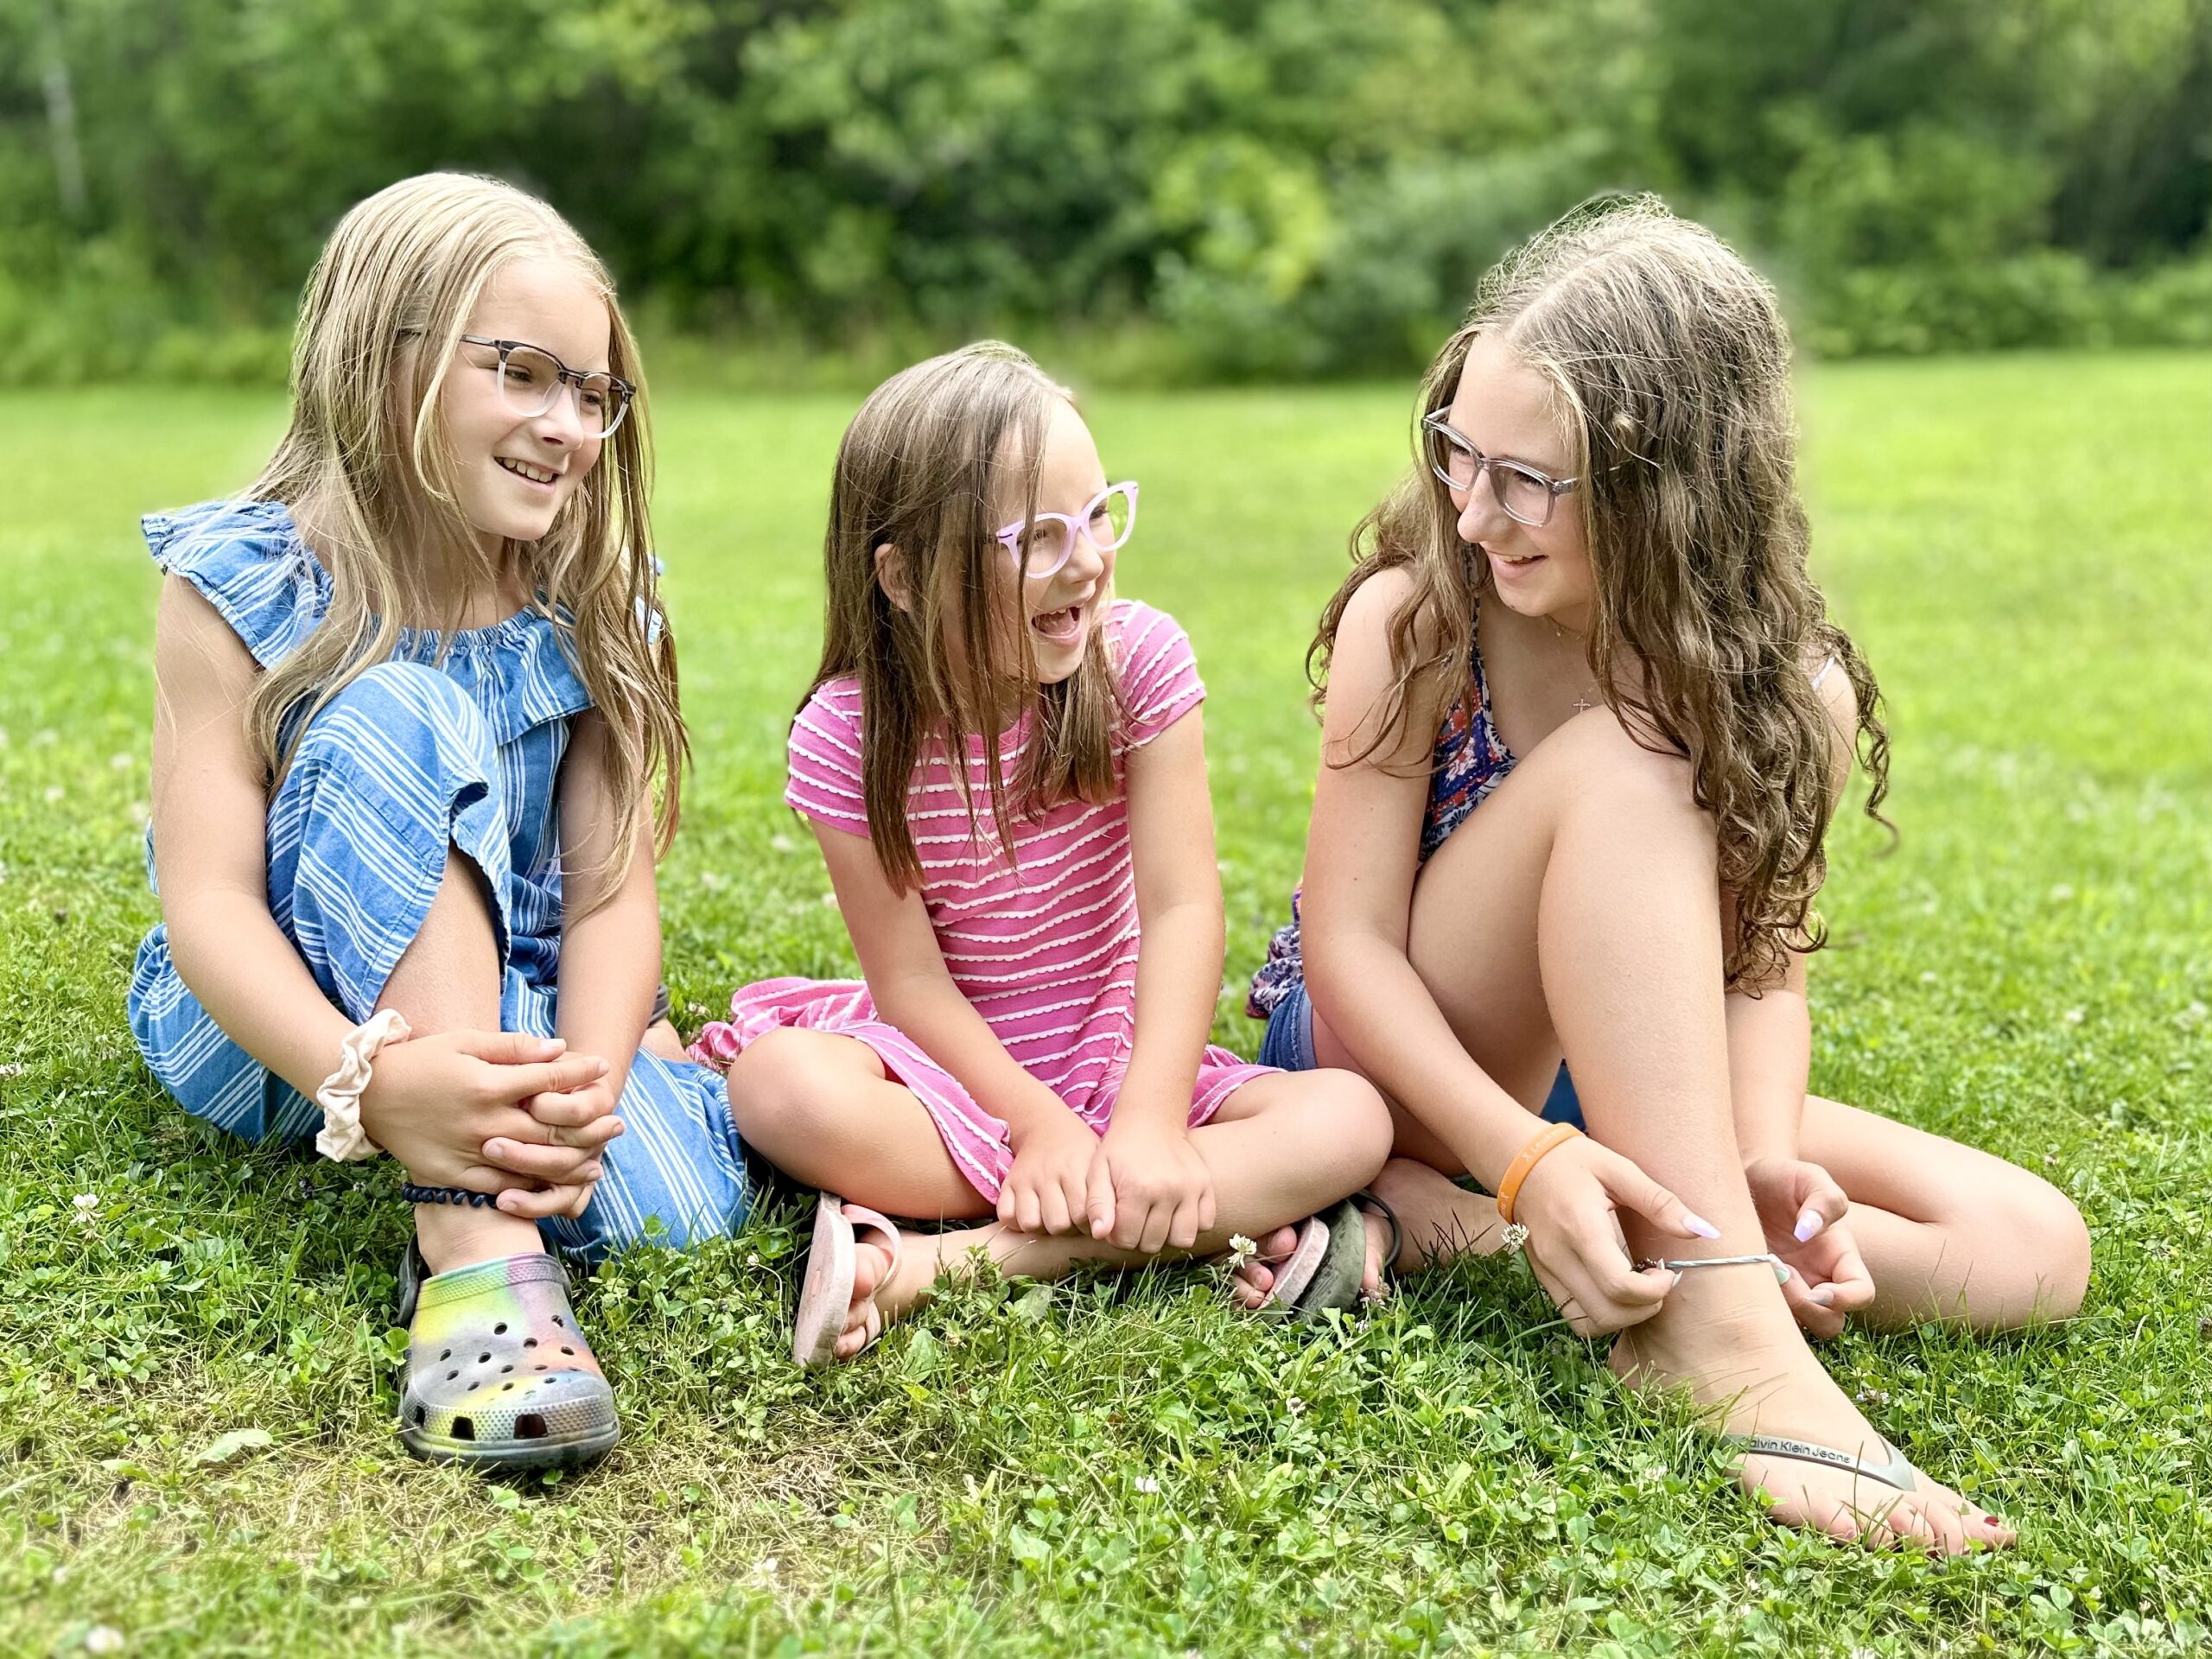 Three young girls sit together on the grass. Each are wearing eyeglasses and smiling.